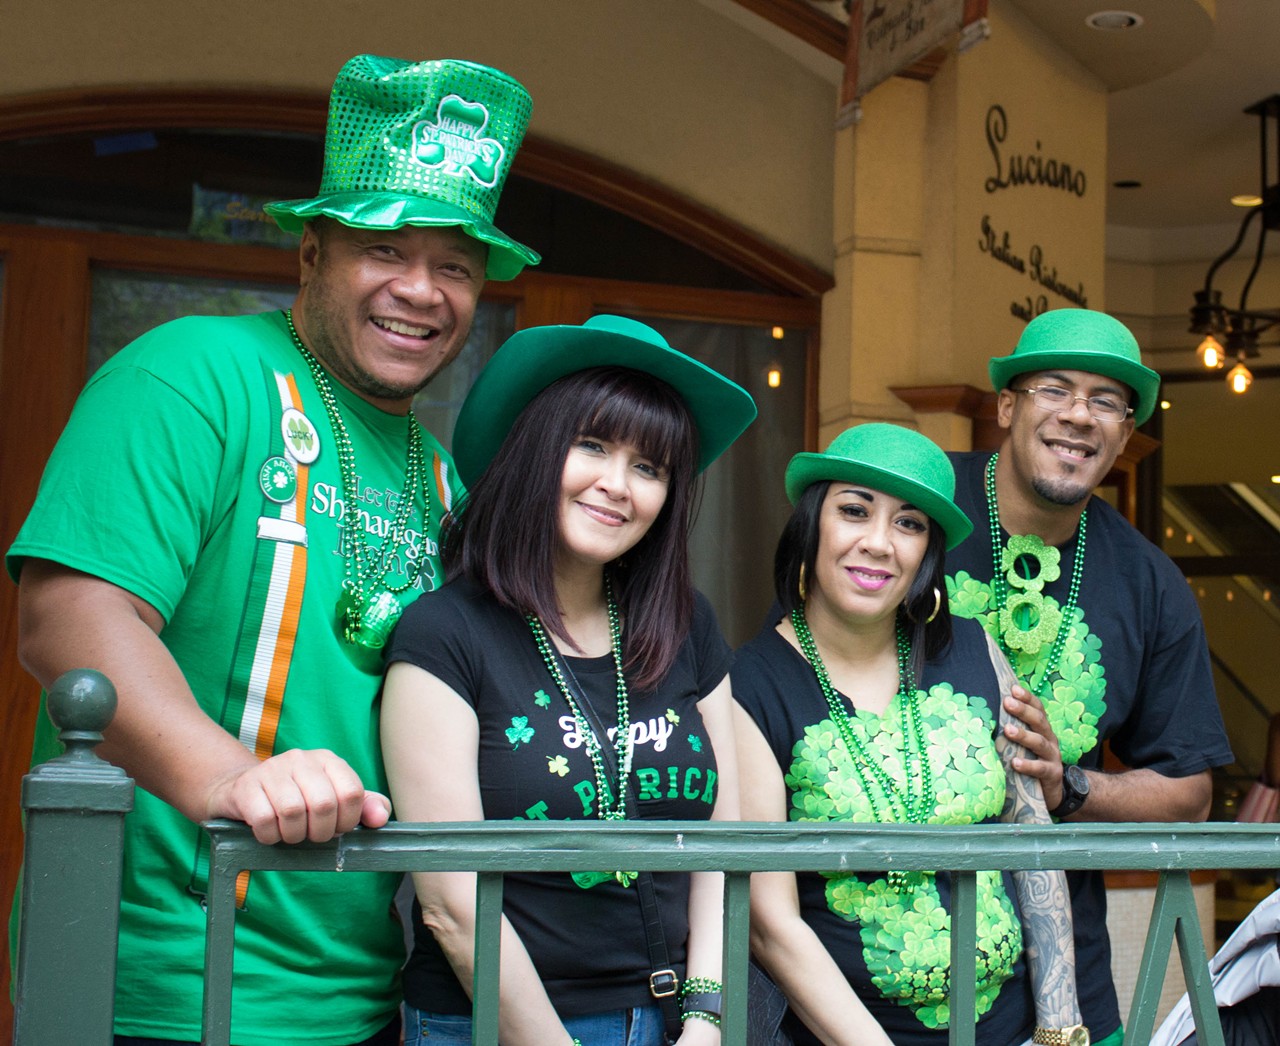 Everyone We Saw at the St. Patrick's Day River Parade and Festival 2018